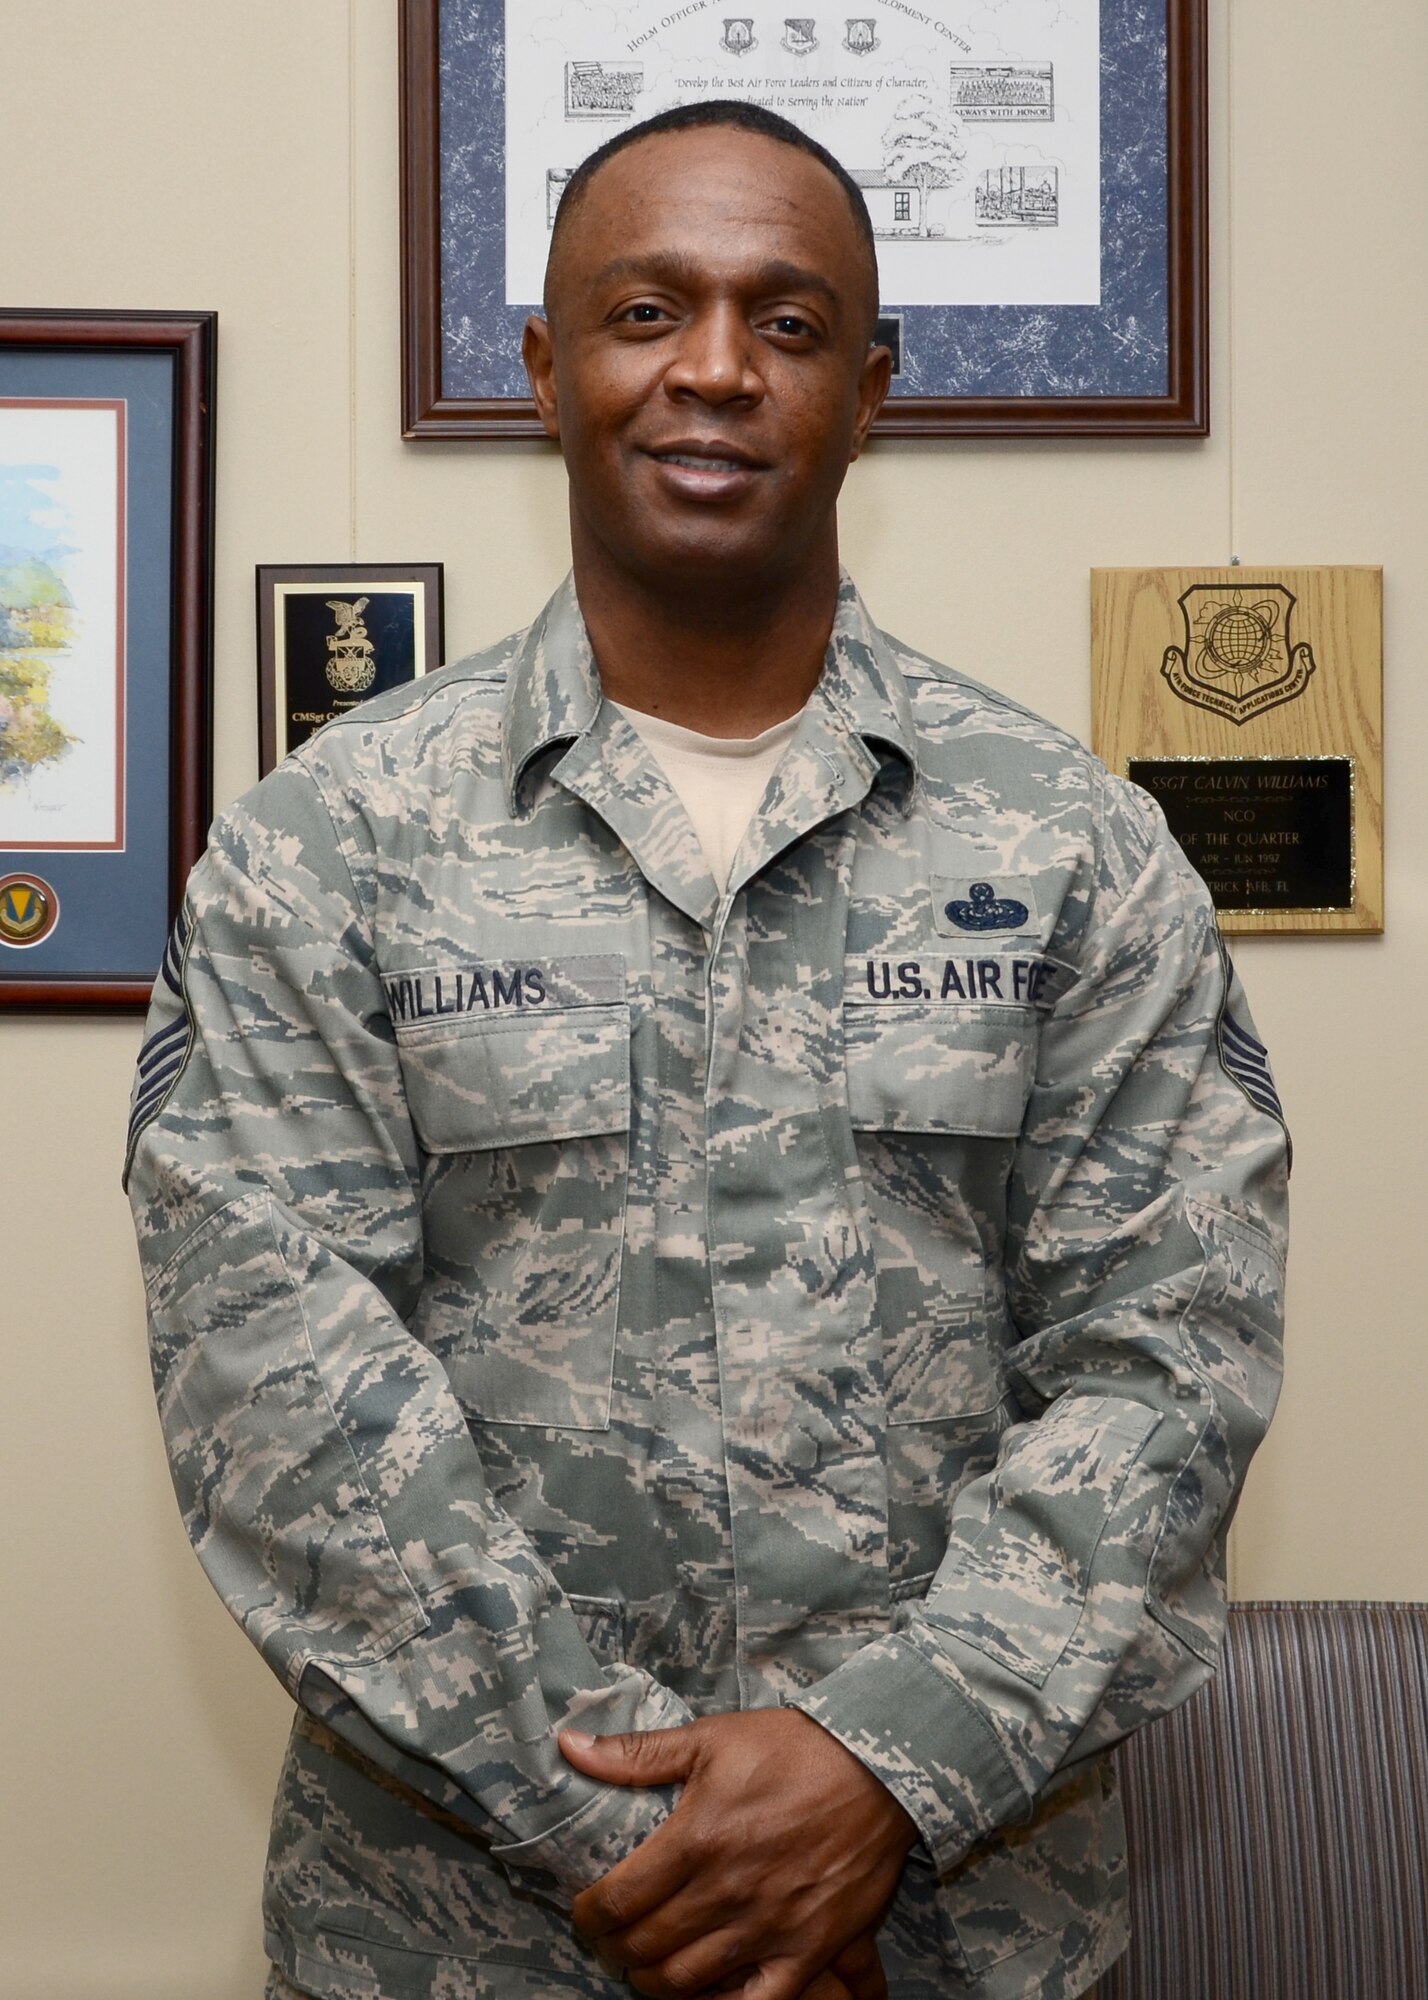 "I agree with the new changes.  It injects the supervisor and the commander into the Airman’s education plan.  By doing so the supervisor can provide guidance and advice to their Airman on how their class schedule could affect mission requirements, which will allow the Airman to make an informed decision on class choices.  It also makes it clear that tuition assistance is a benefit and not an entitlement and will prevent individuals from taking advantage of the education benefits provided by the military." - Chief Master Sgt. Calvin Williams, 12th Air Force (Air Forces Southern) Command Chief Master Sergeant. 